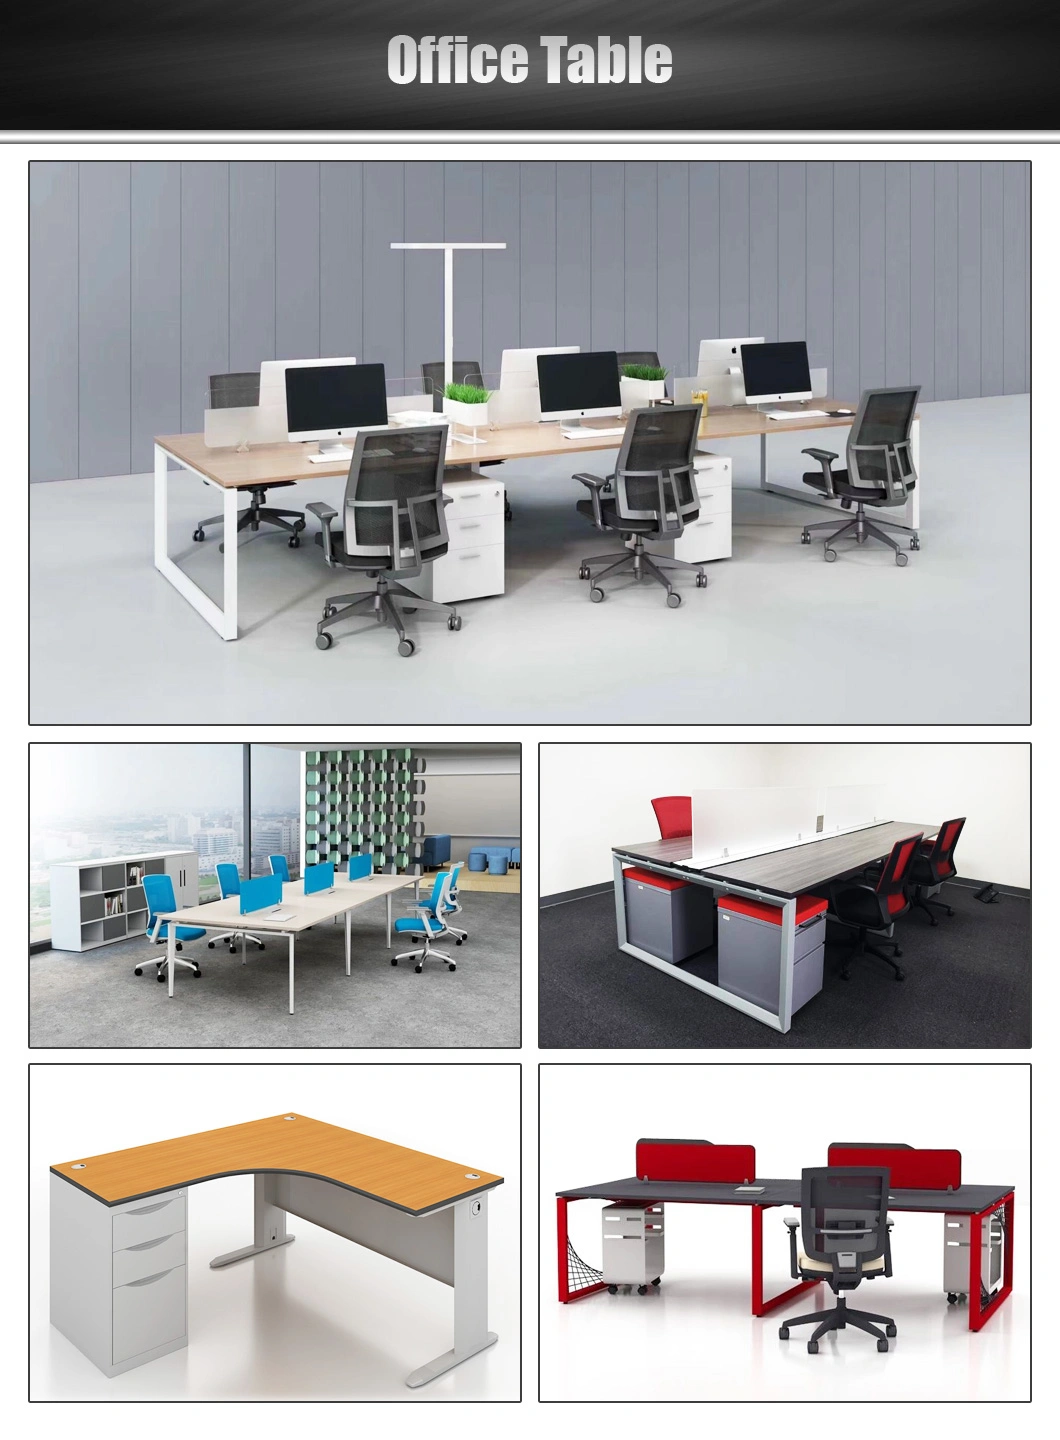 Office Furniture, Lateral Drawer Study Icab/Webber Export Carton Packing Cabinet Steel Storage